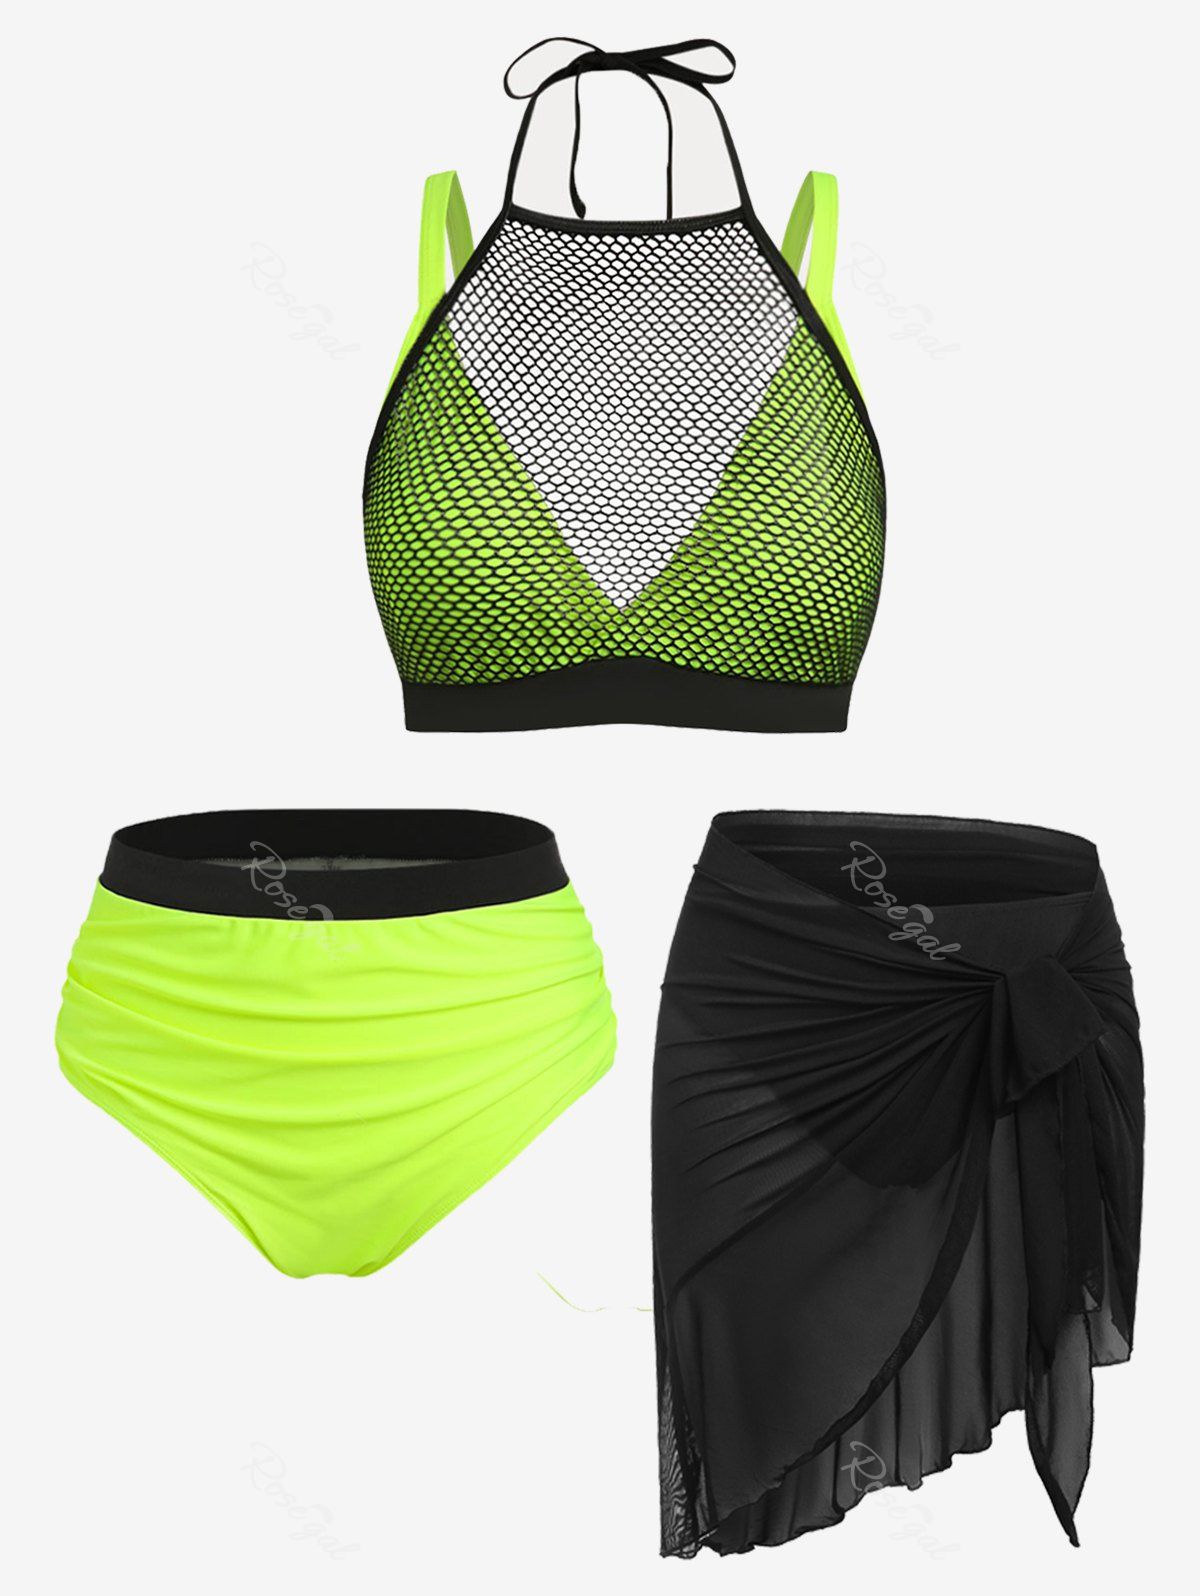 Hot Fishnet Swim Top and Neon Briefs and Wrap Skirt Cover Up Swimsuit Plus Size Summer Outfit  